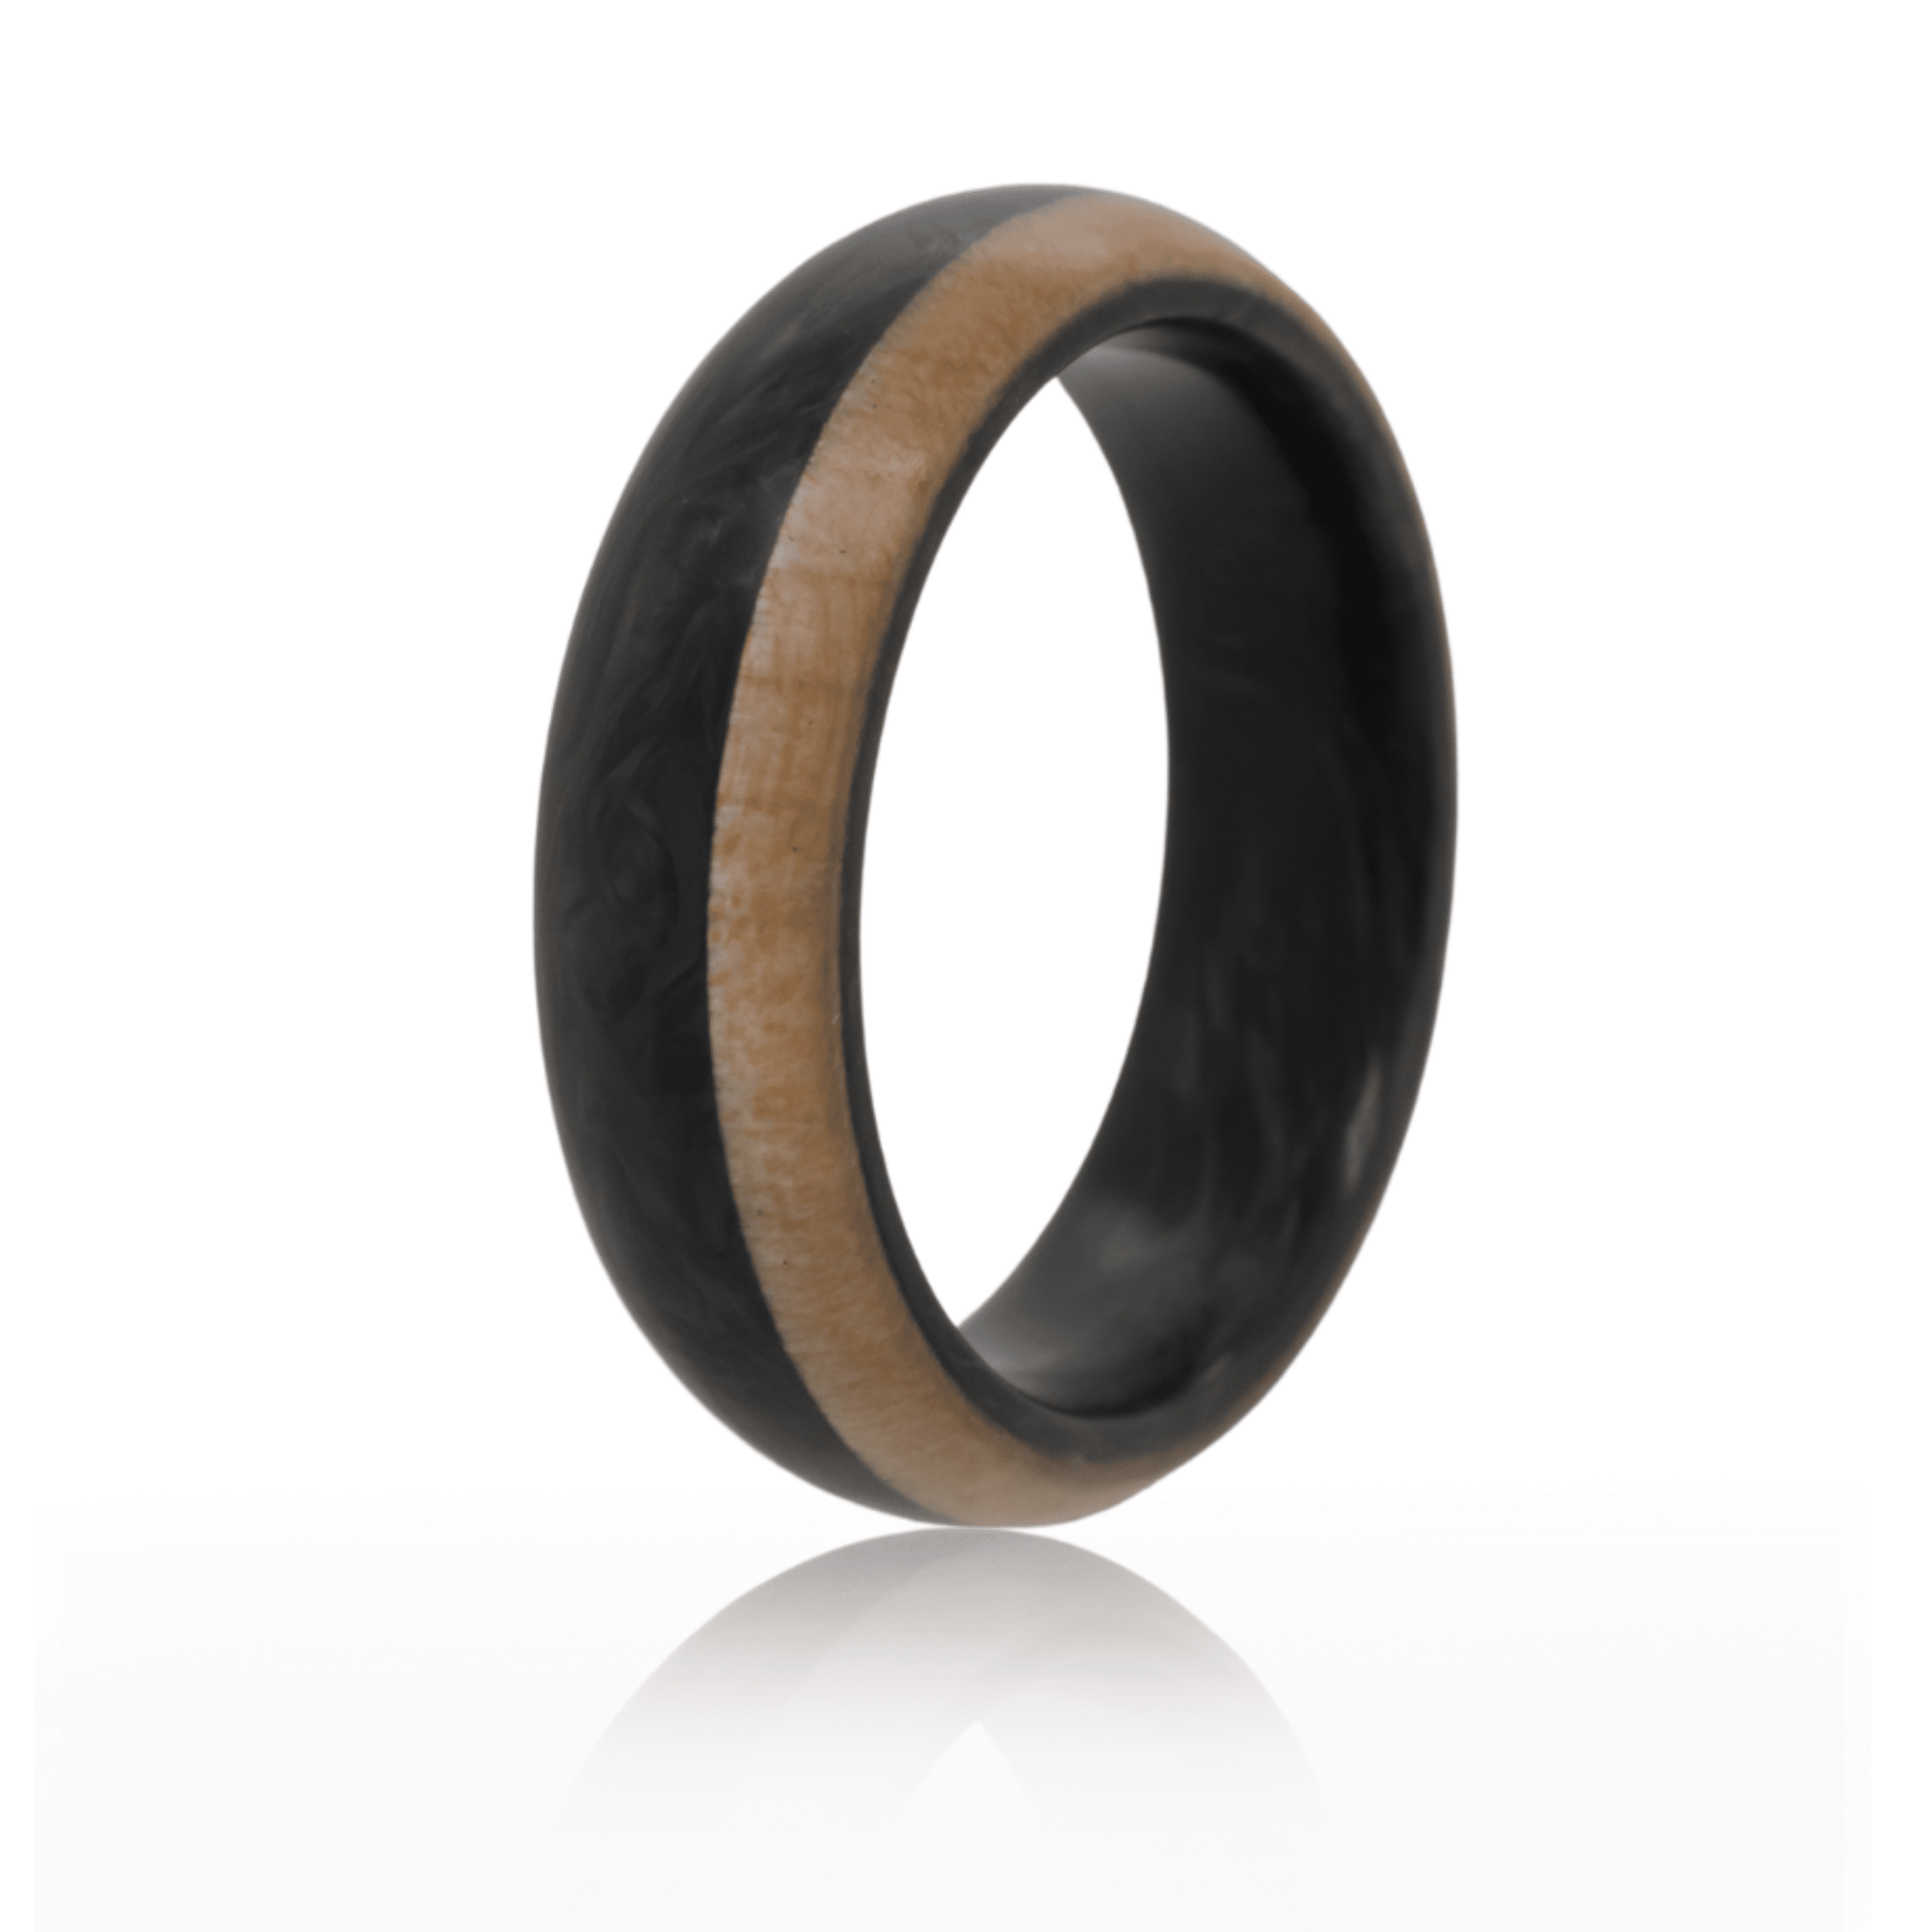 Forged Carbon Fiber Ring with maple wood rim.